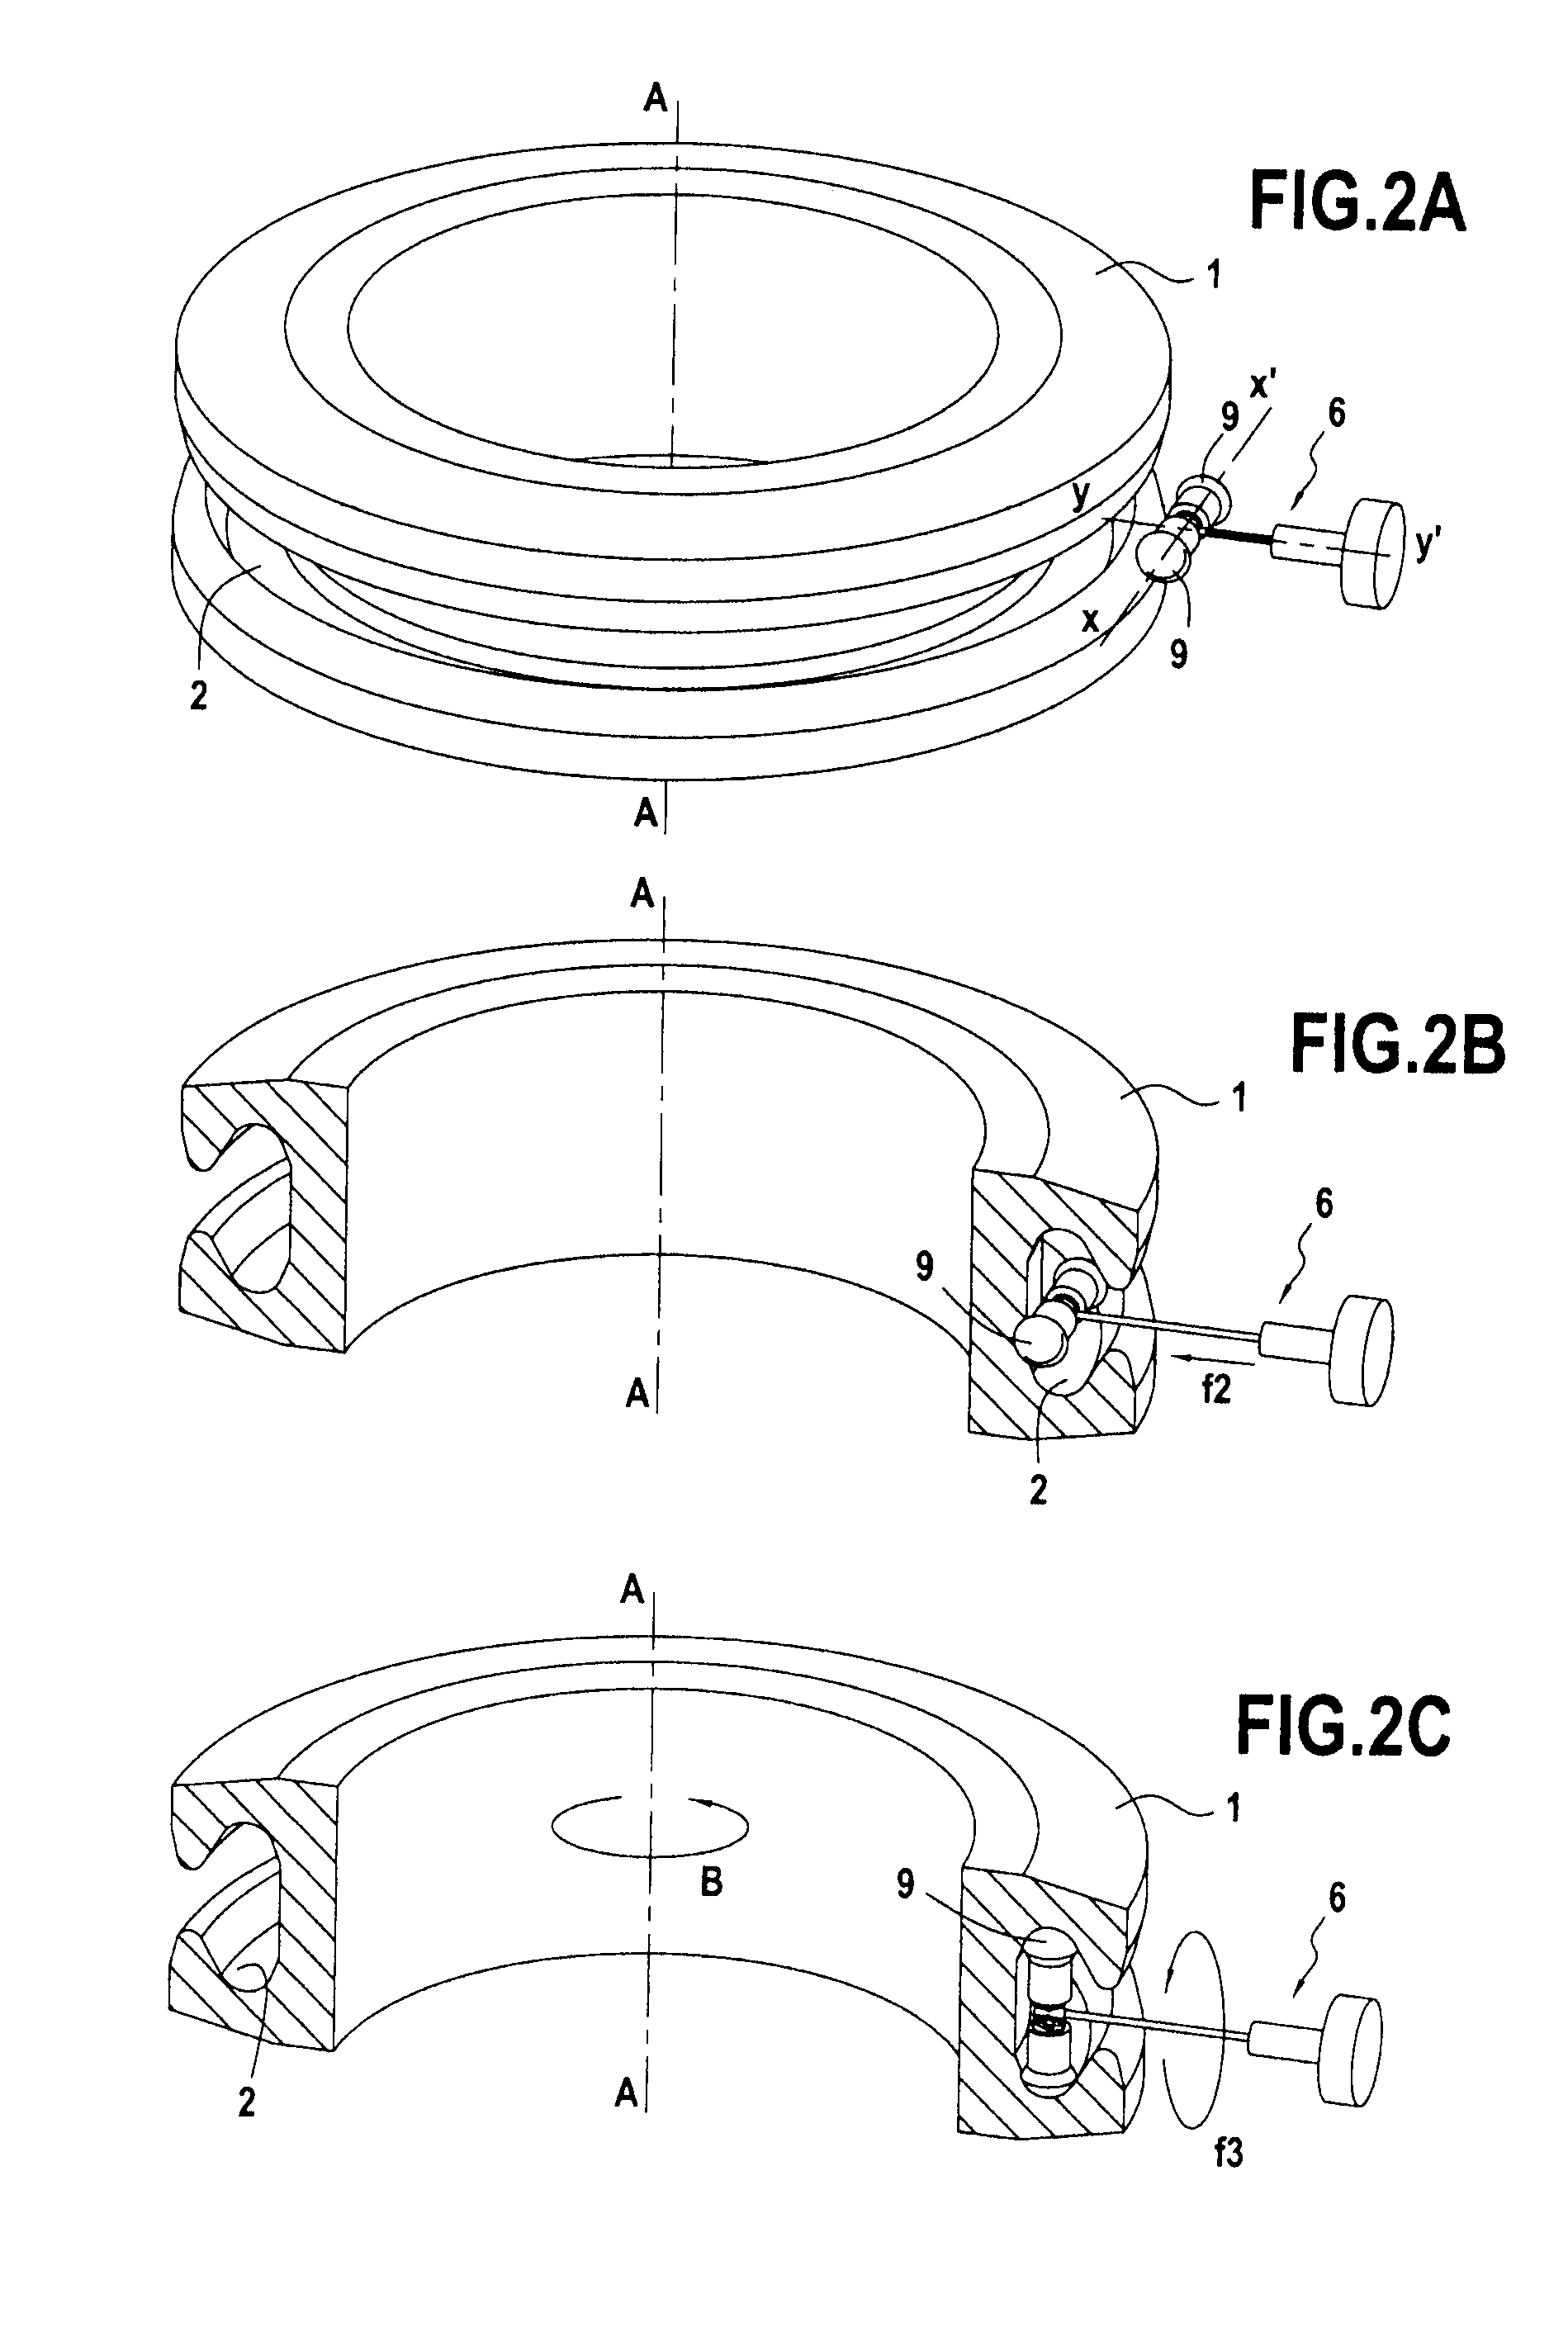 Probe for inspecting the surface of a circumferential slot in a turbojet disk by means of eddy currents